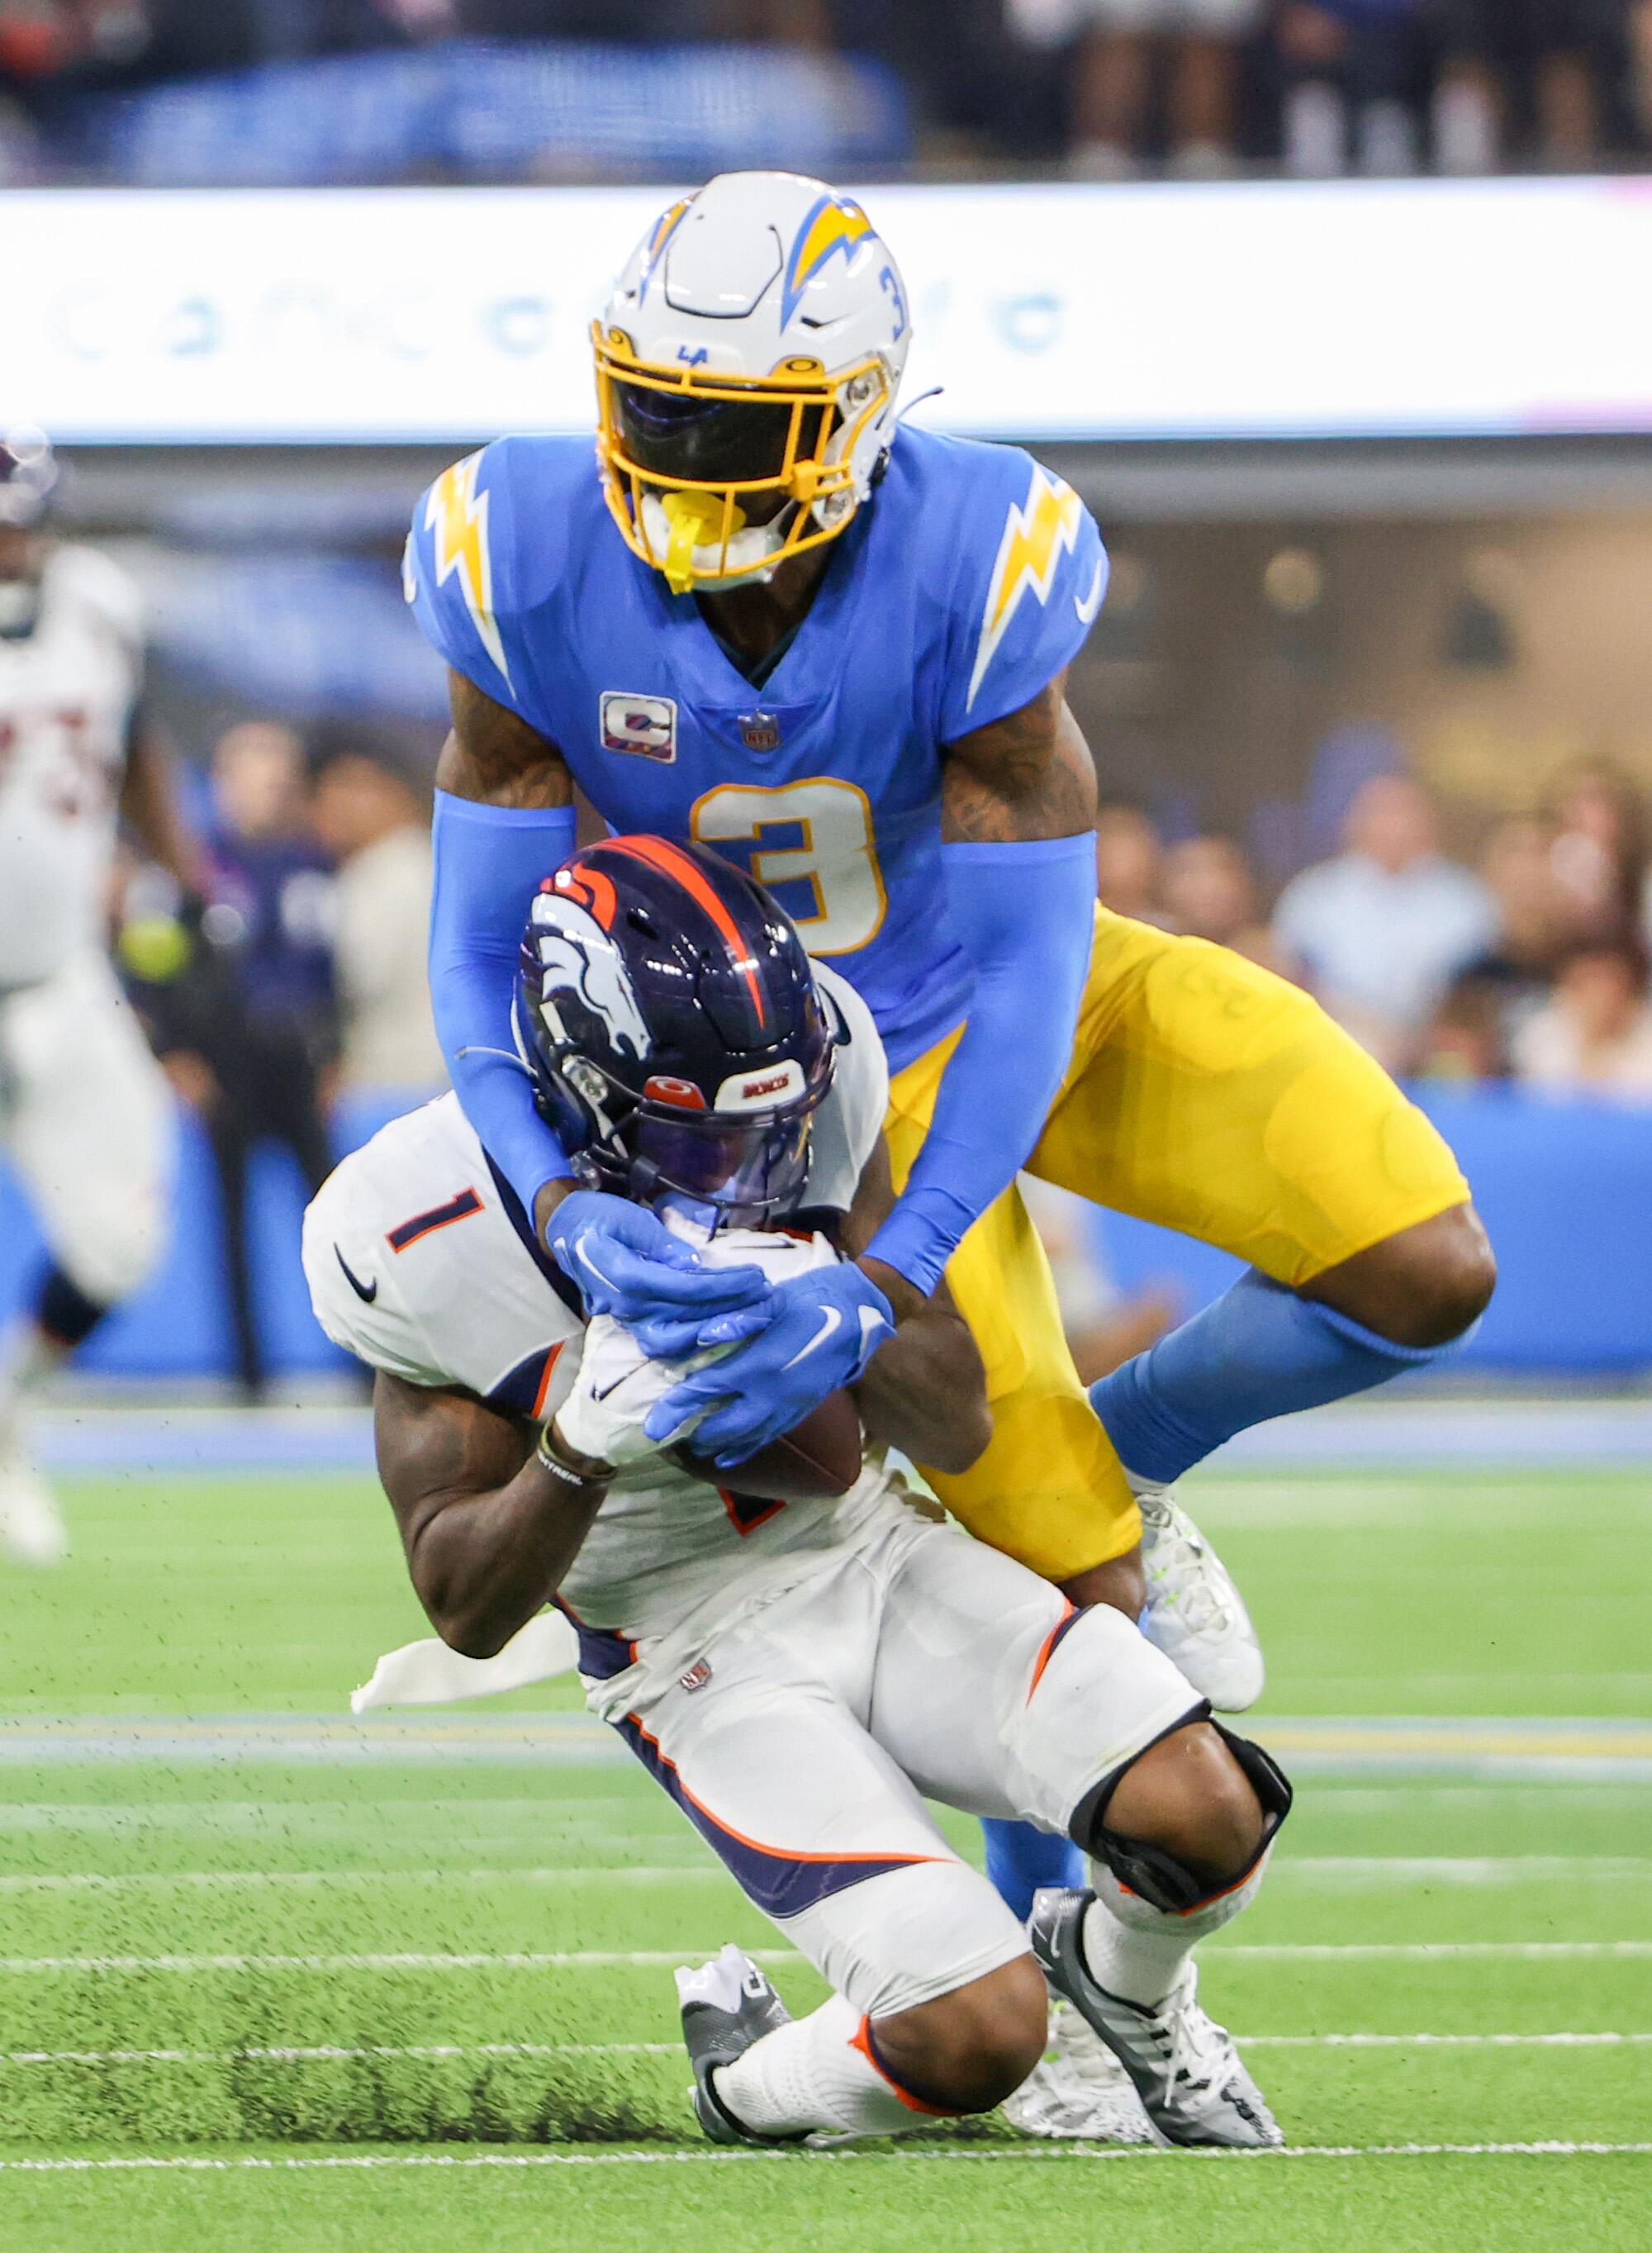 Denver Broncos wide receiver KJ Hamler hauls in a long pass over Chargers safety Derwin James Jr. in the first half.